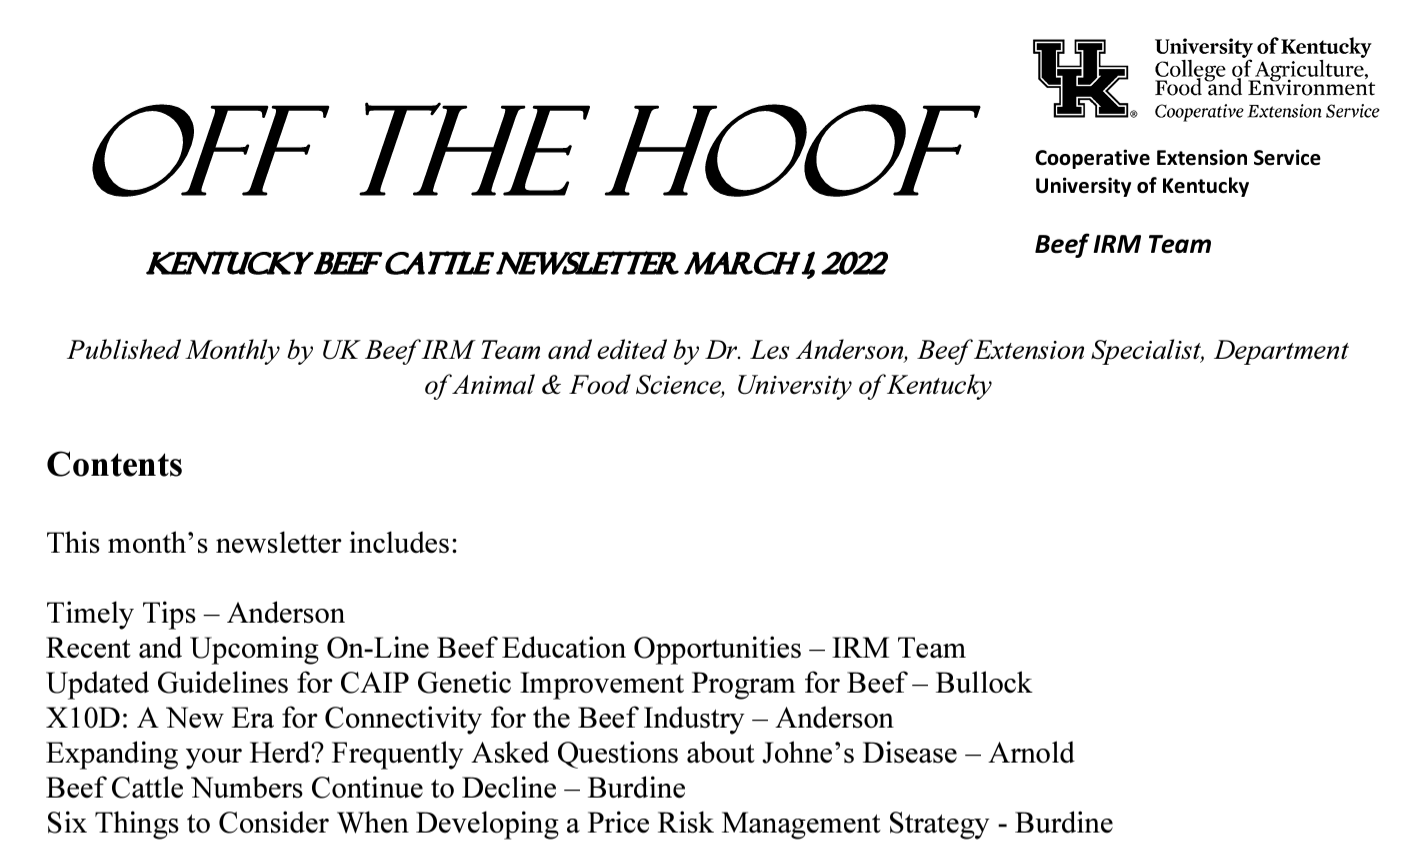 March 2022 Off the Hoof Newsletter